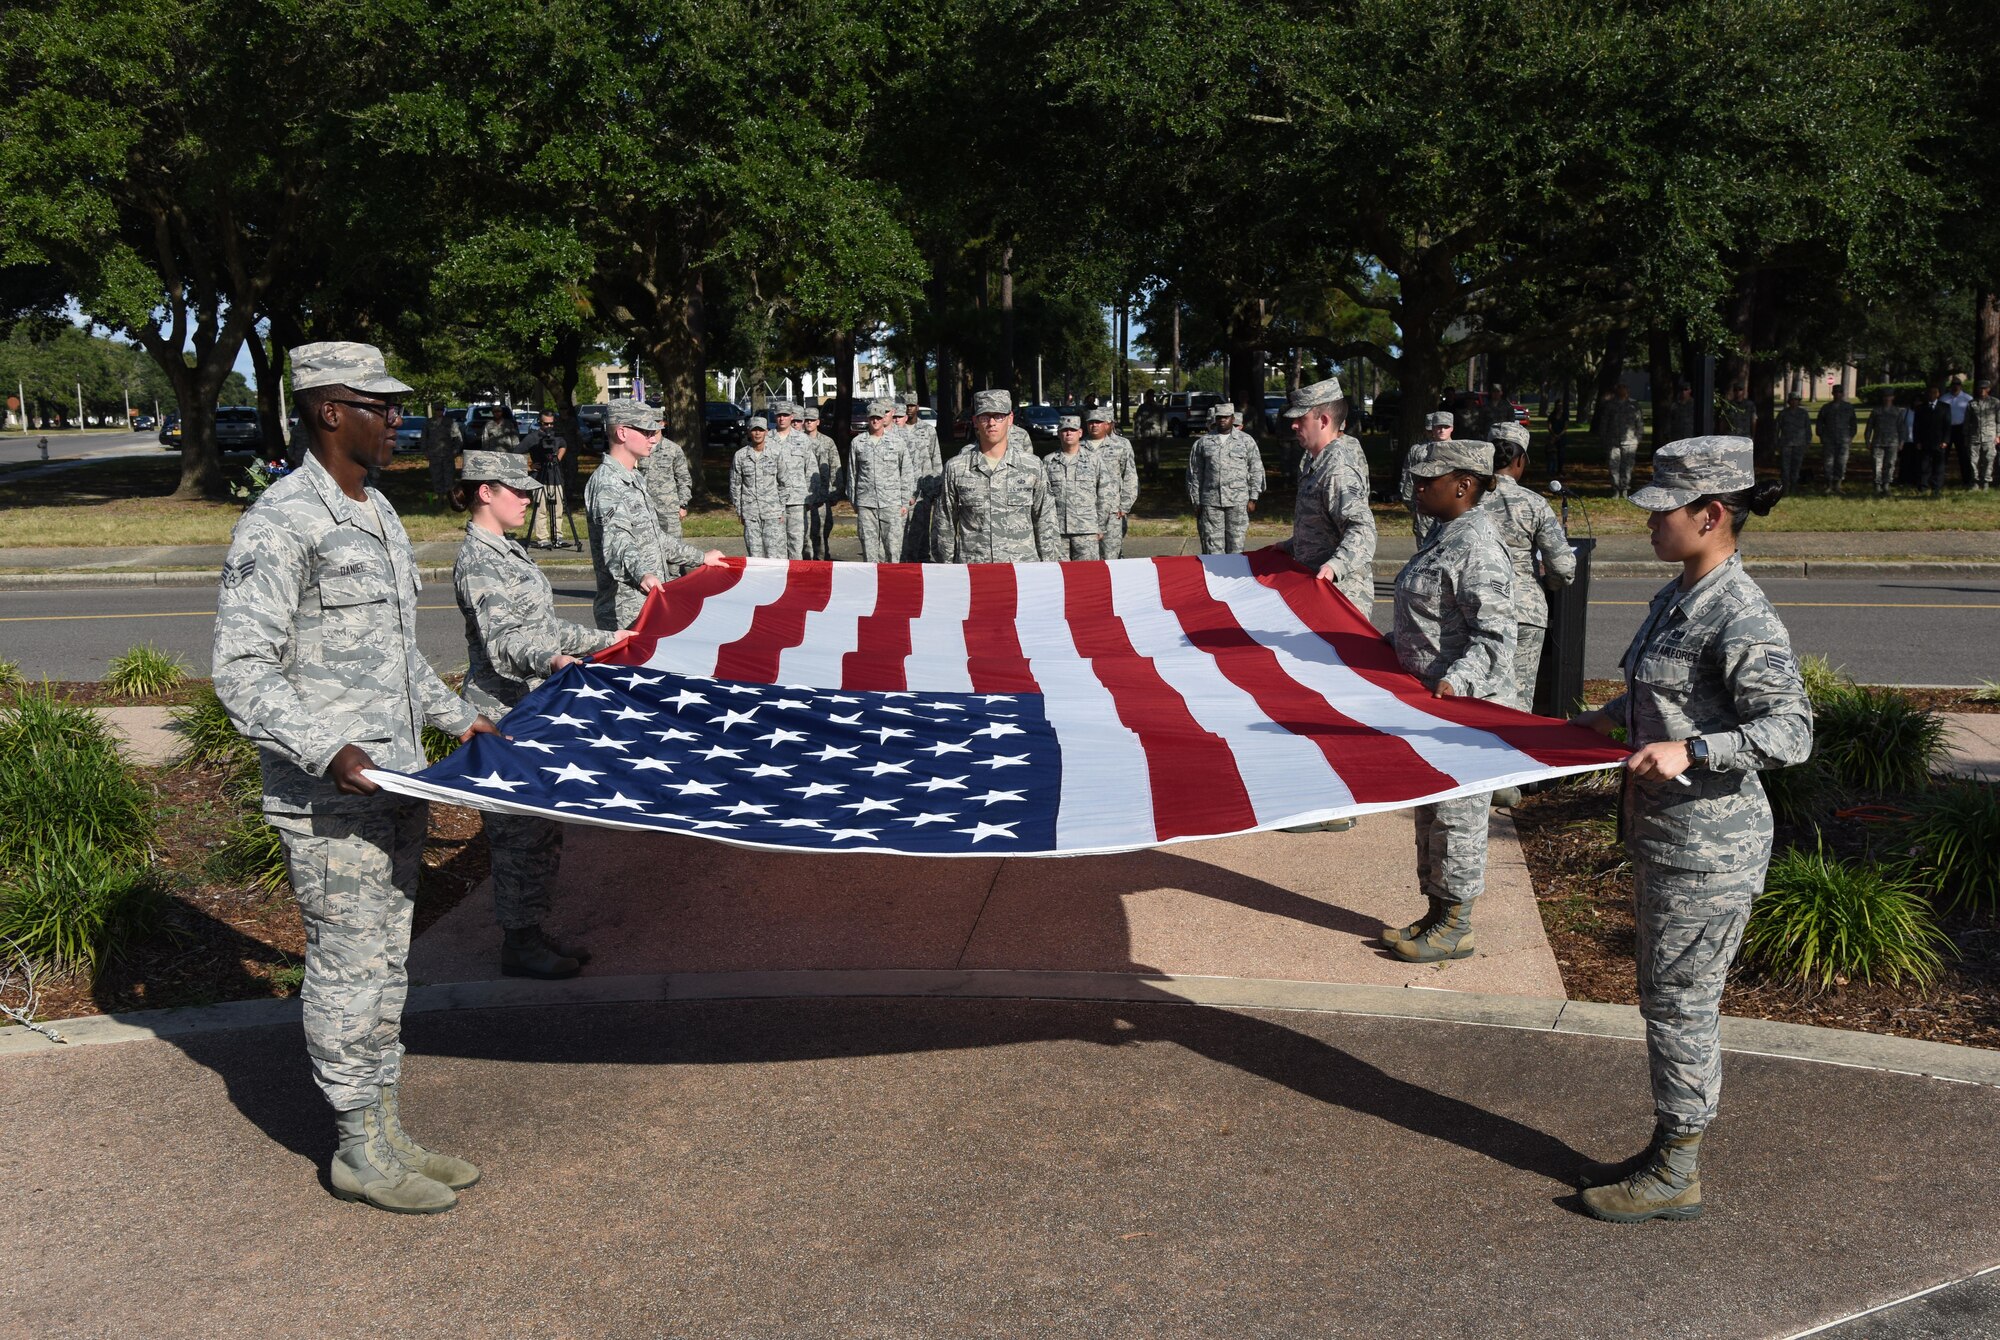 Keesler personnel participate in a flag folding ceremony during the POW/MIA Retreat Ceremony Sept. 15, 2017, on Keesler Air Force Base, Mississippi. The event, hosted by the Air Force Sergeants Association Chapter 652, was held to raise awareness and pay tribute to all prisoners of war and military members still missing in action. (U.S. Air Force photo by Kemberly Groue)